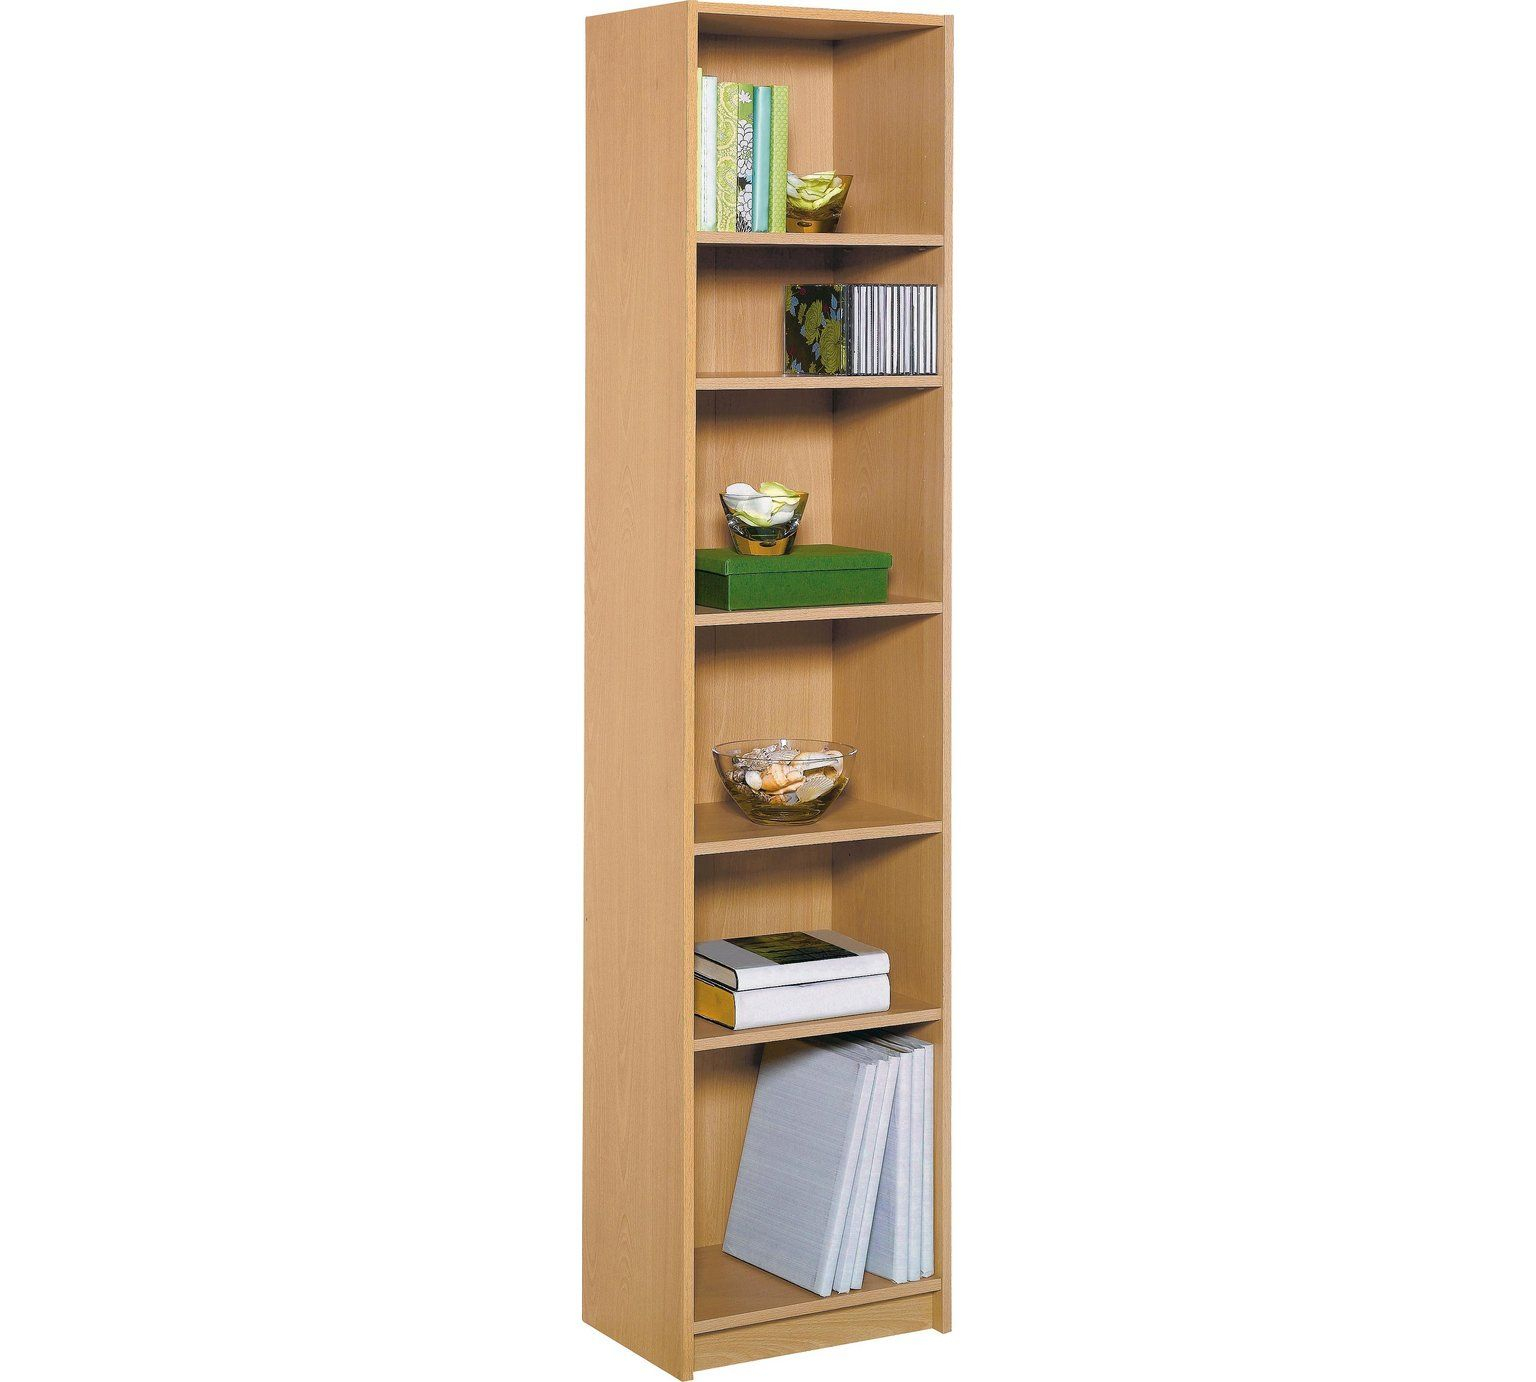 Home Maine 5 Shelf Half Width Bookcase Beech Effect intended for size 1536 X 1382